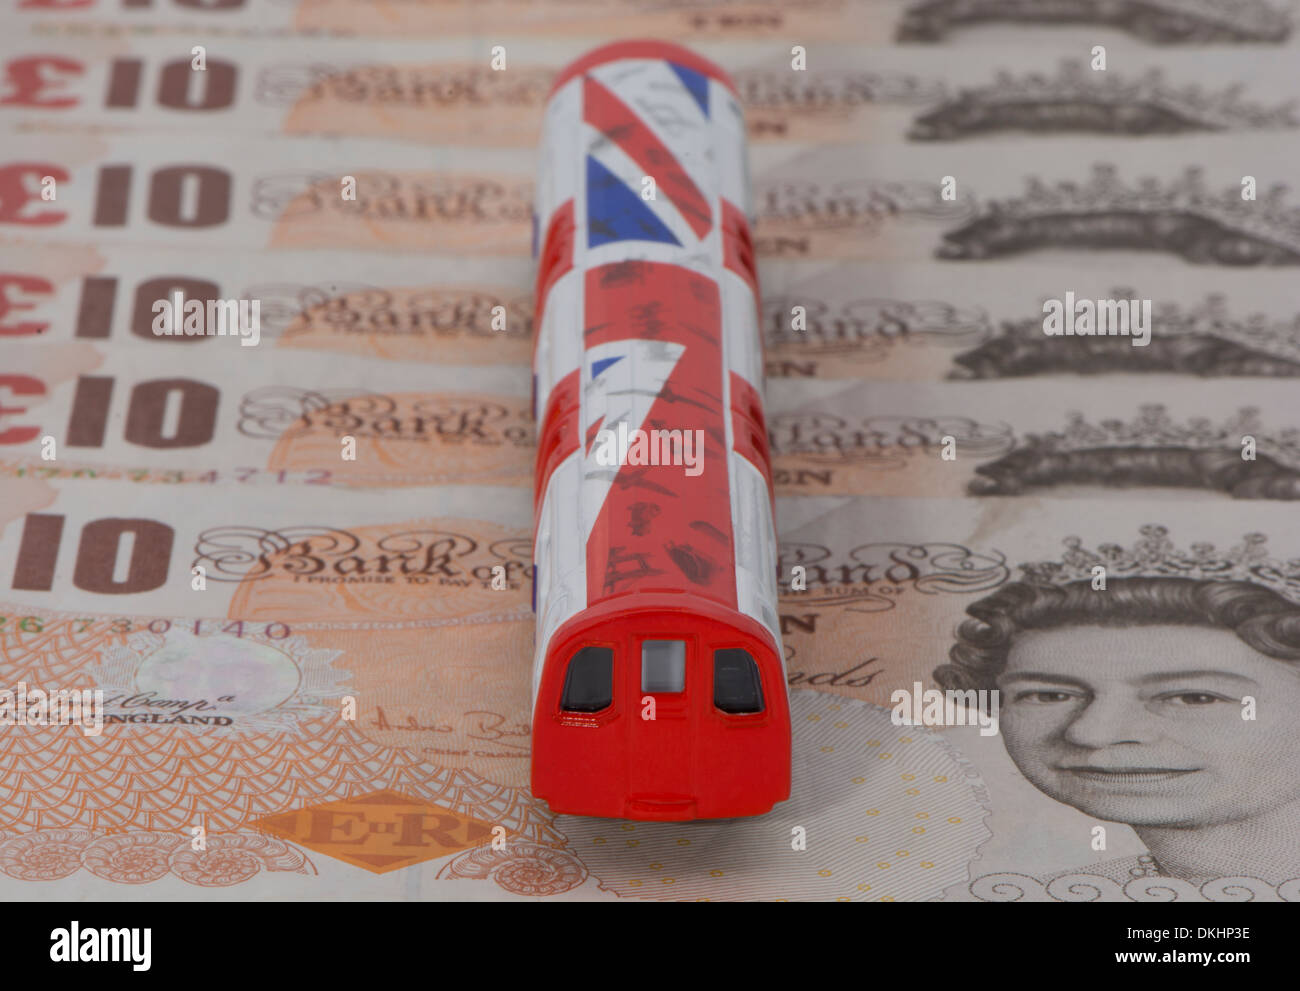 A Model London Underground Train On A Pile Of Ten Pound Notes Stock Photo